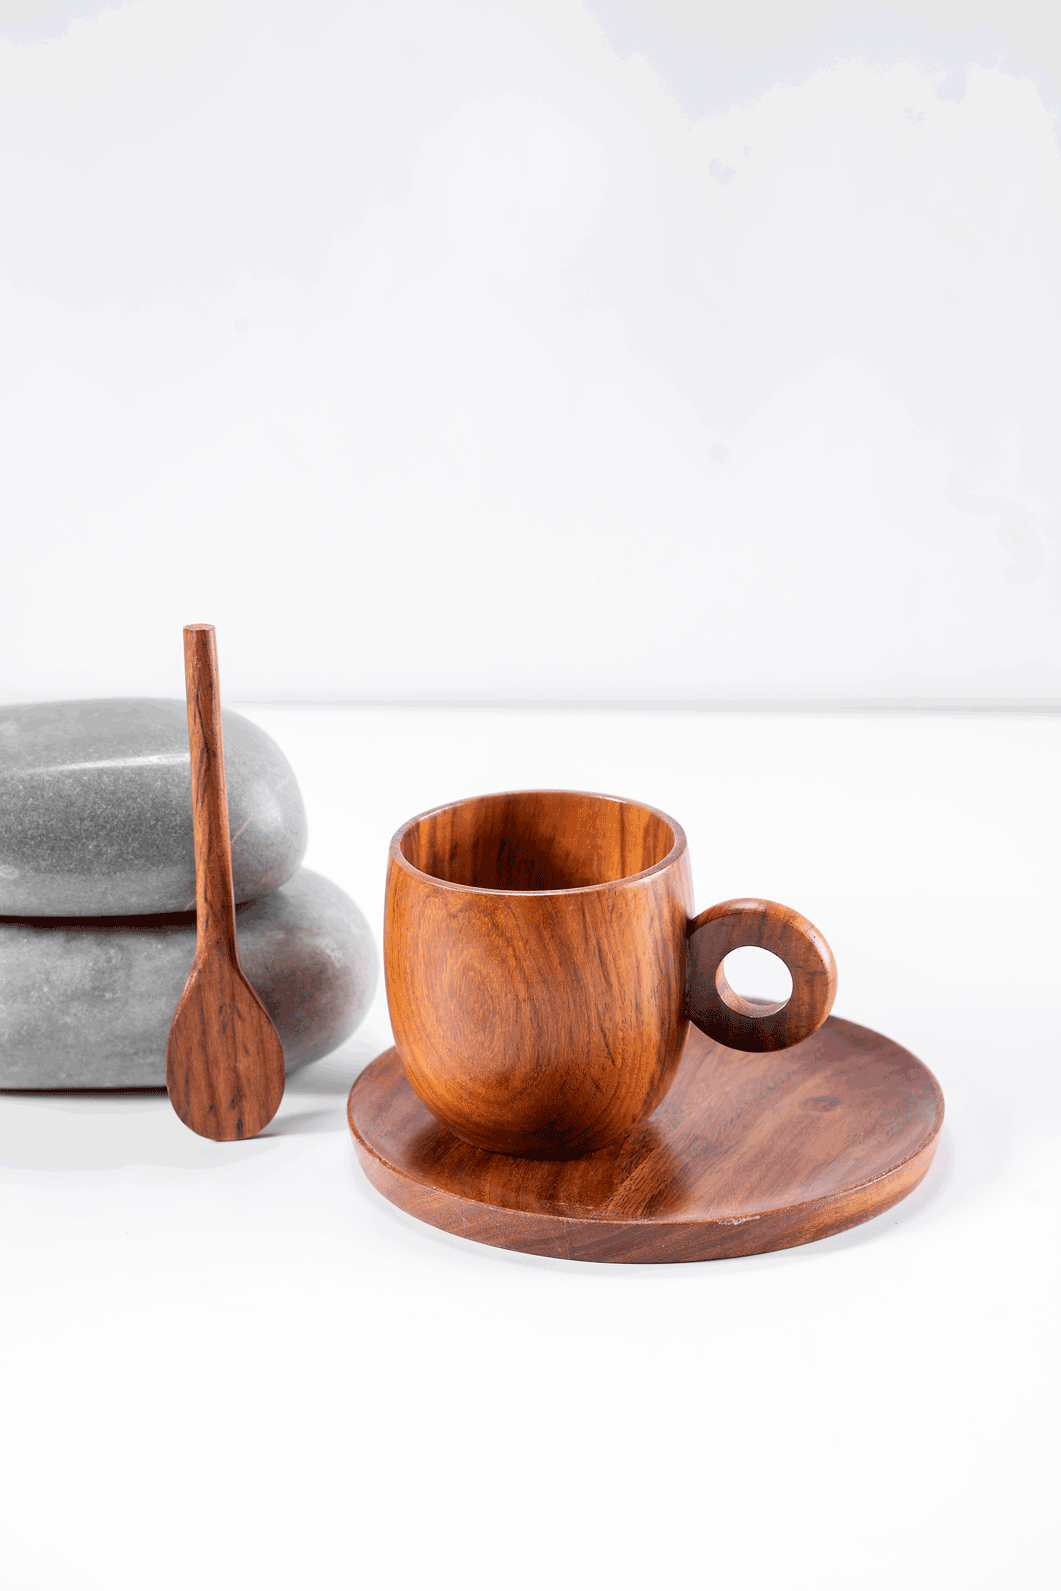 Thumbnail preview #0 for Shikora - Wooden cup saucer and spoon set